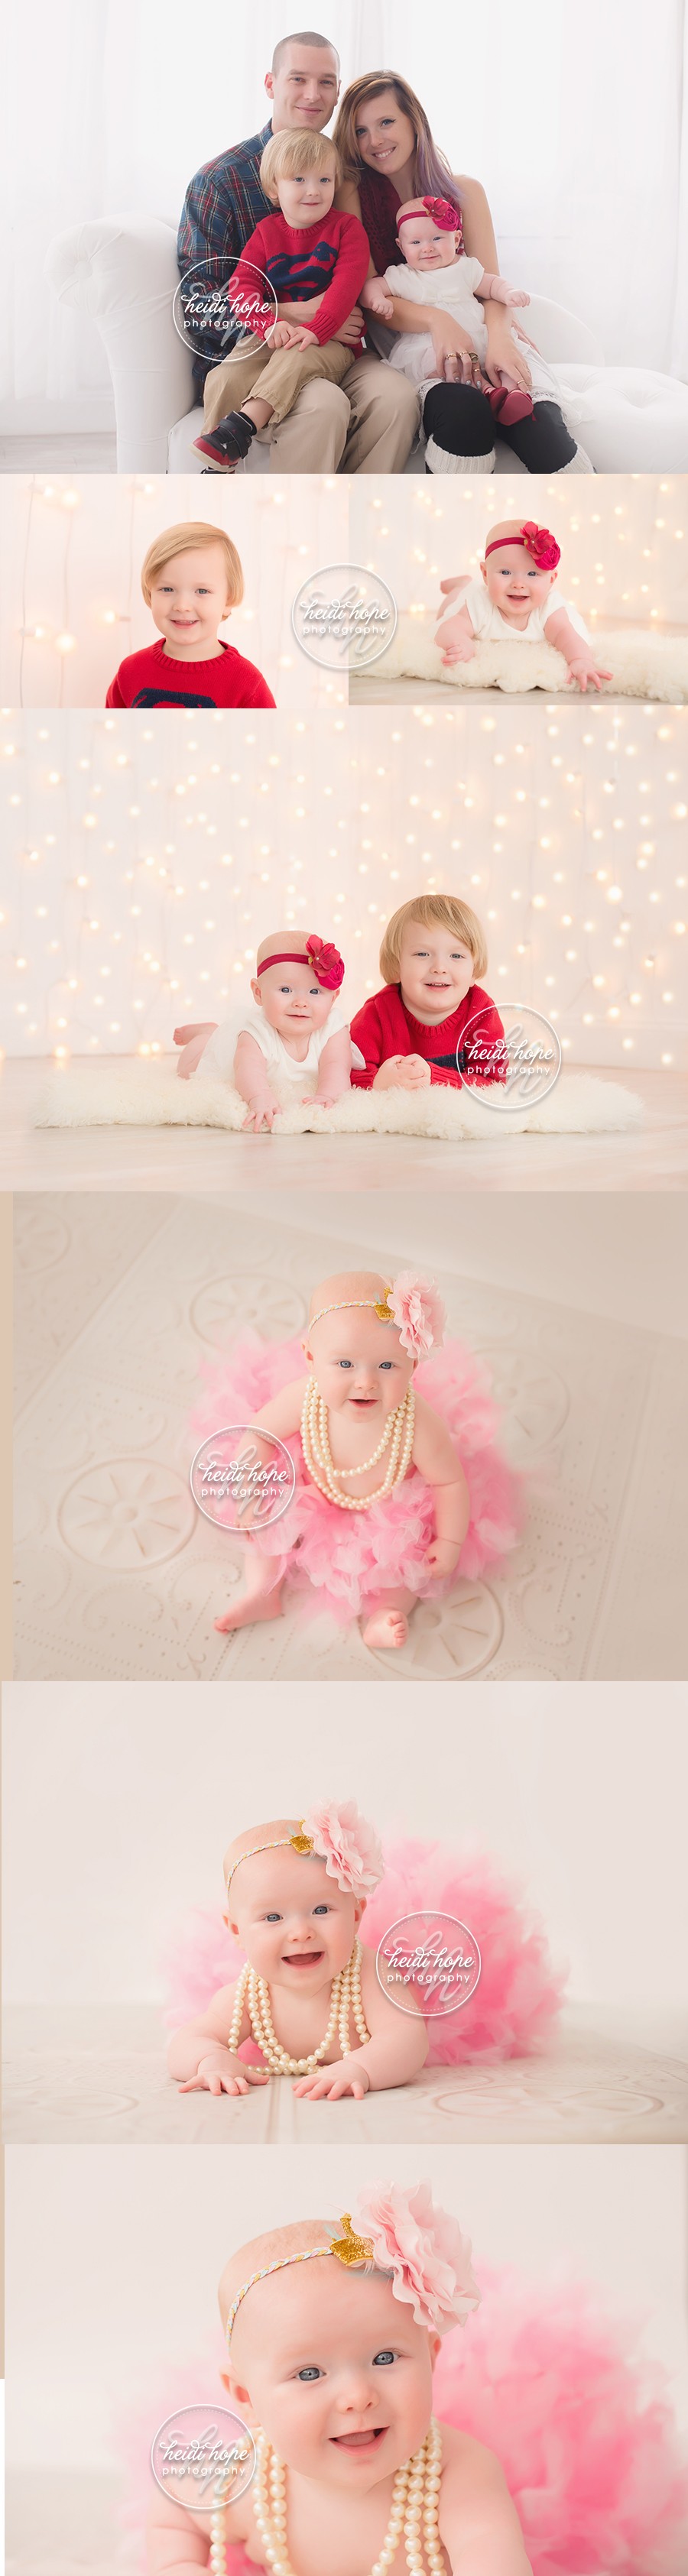 6 month old holiday portraits with family